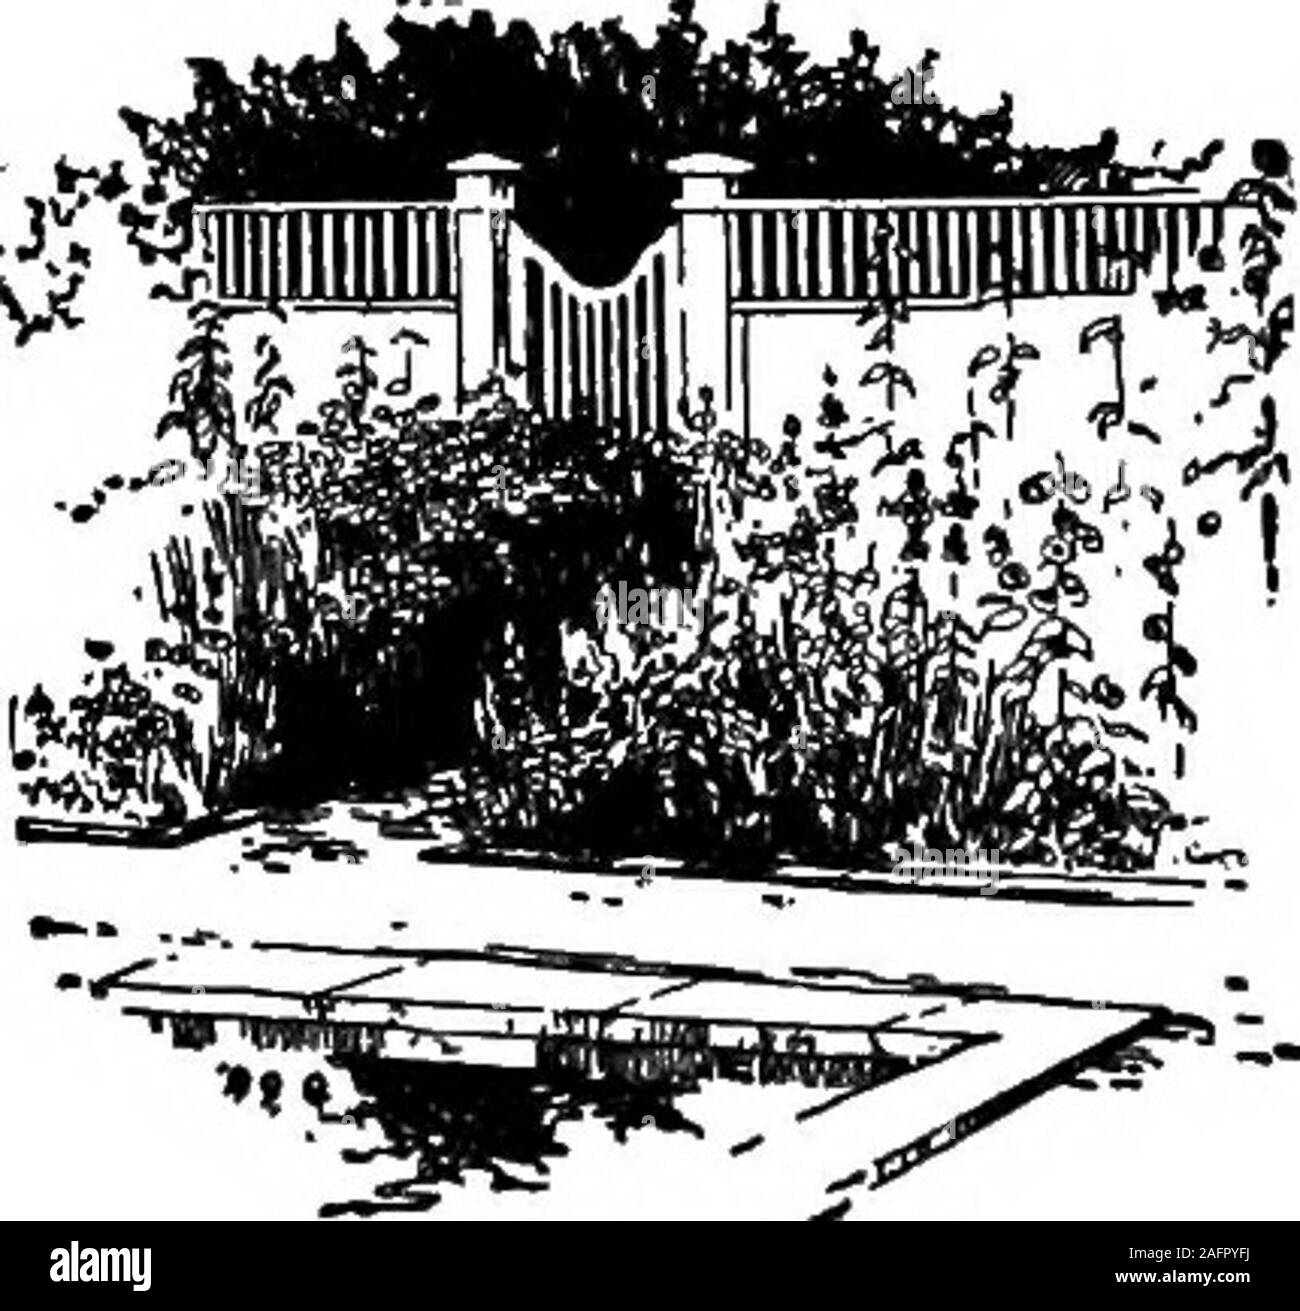 . The little garden. as the golden-leaved shrubs, so difficult to use well, obsoletebecause undesirable; and this is their method of disposing ofsuch stuff. To find out where to buy, send a postcard to anynursery listed or advertising in a gardening periodical; a goodcatalogue of shrubs not only is a guide for buying but serves,too, as an informal textbook for reference. Indeed, the tree-,shrub-, and seed-lists are first aid to those innocent of horticul-tural knowledge, and quickly lead to the buying of more per-manent literature on this enthralling subject. When all is said, the enclosed pla Stock Photo